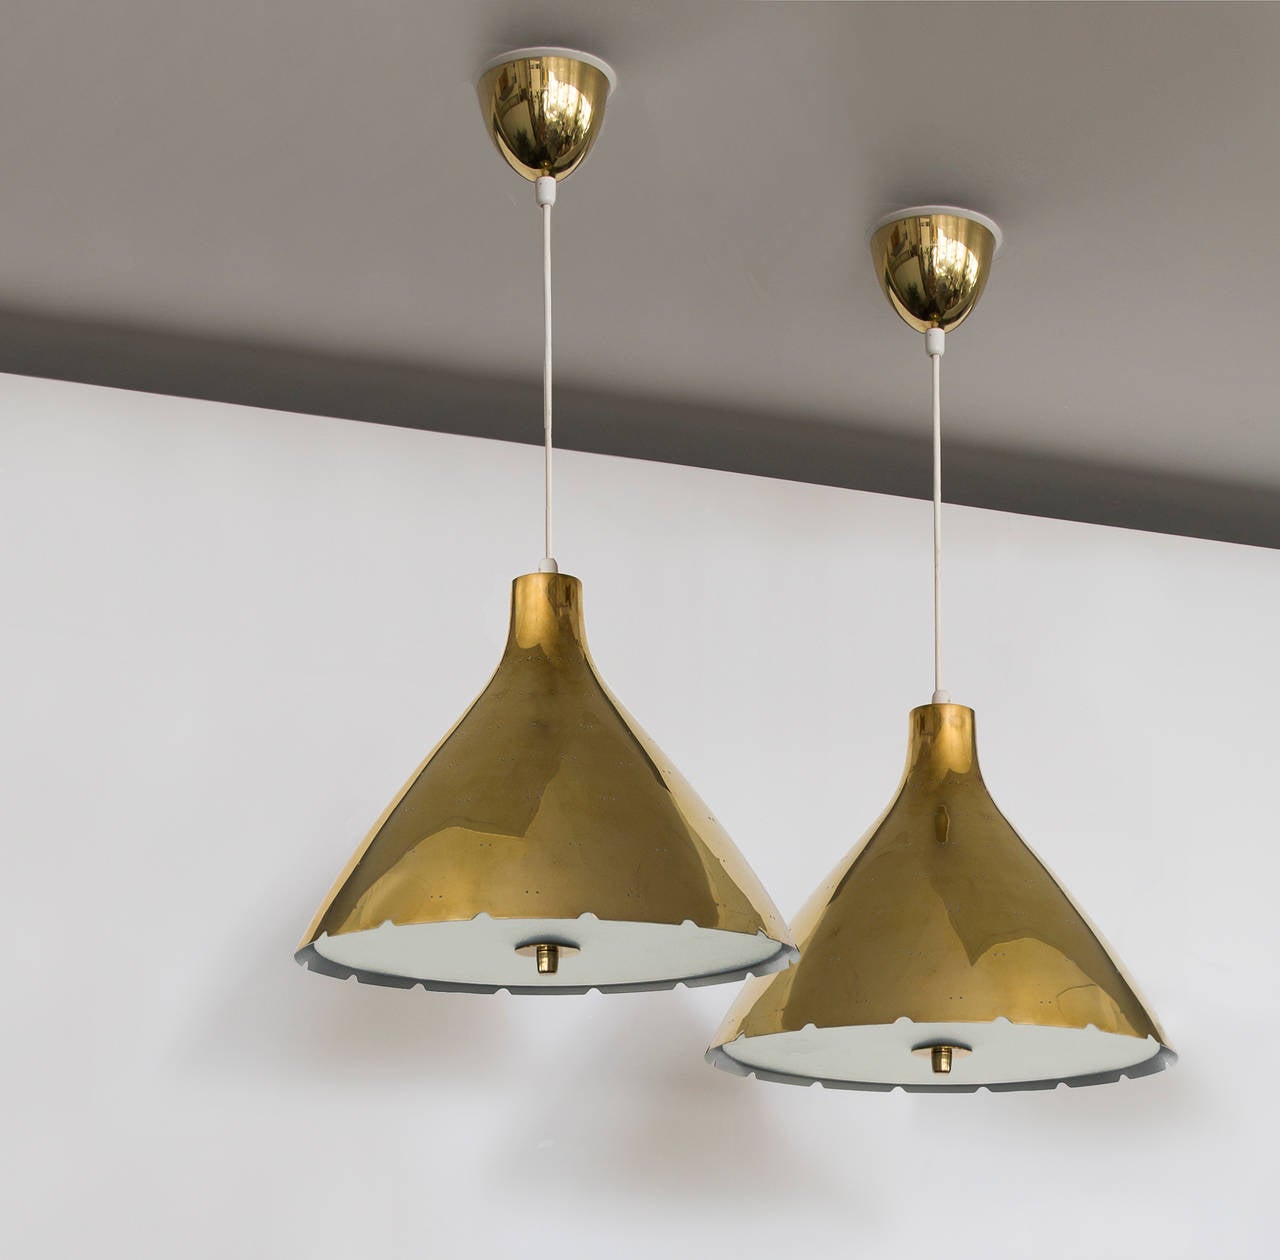 Paavo Tynell.

Brass ceiling lamps.

Taito Oy,
Finland, late 1940s-early 1950s.
Measures: Diameter 35 cm, height/drop 70 cm, height/shade 26 cm.

Impressed with makers mark TAITO.

Literature: Finland House catalog, pg 20 (model 10209 with